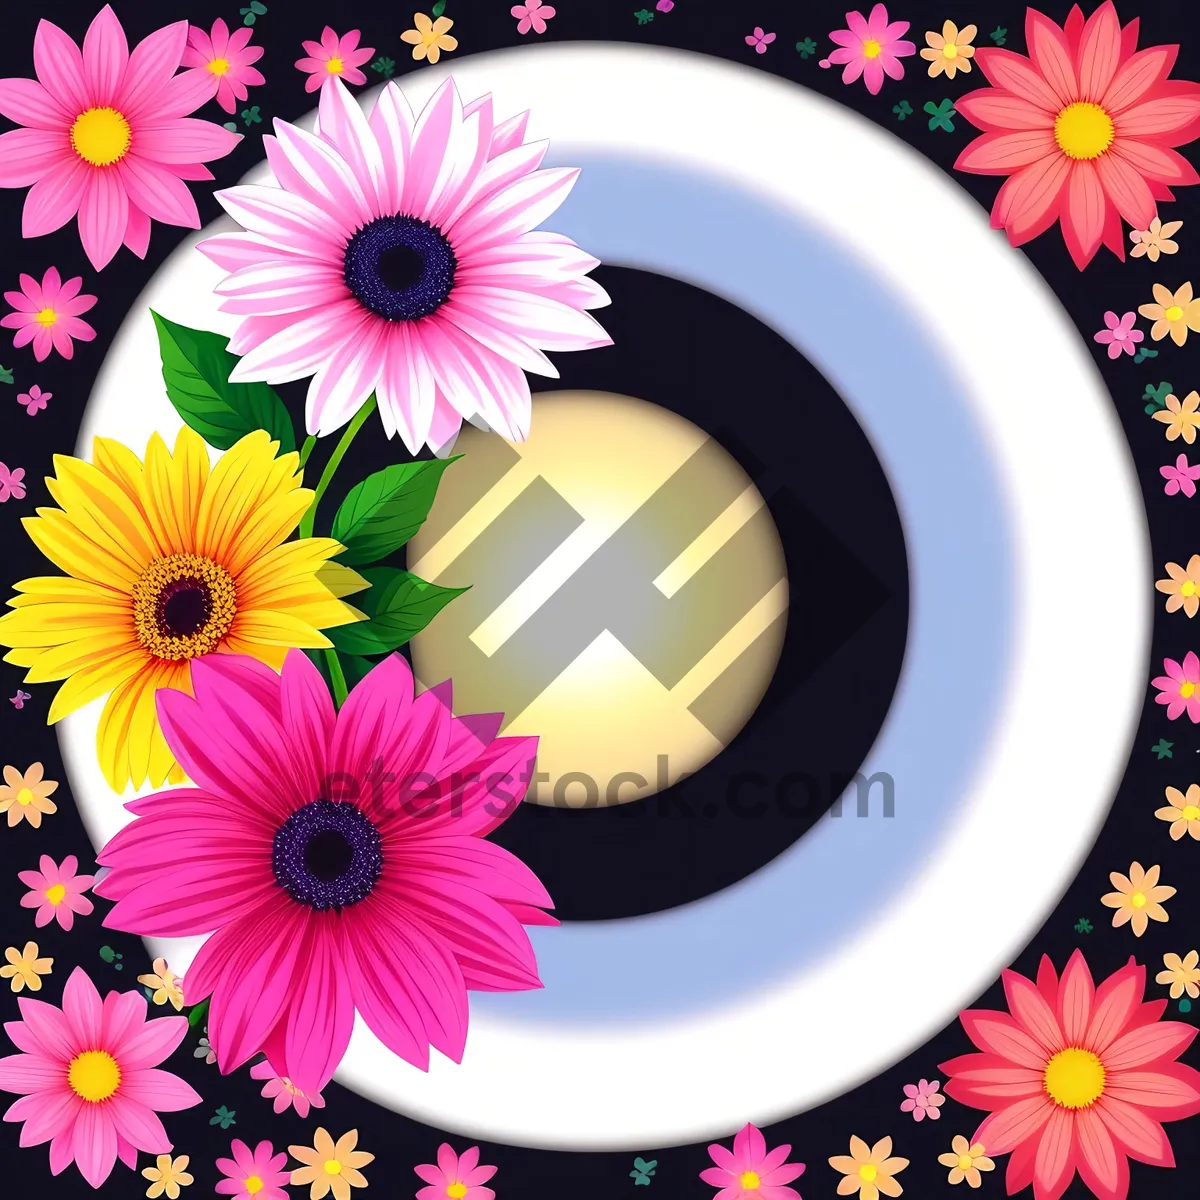 Picture of Vibrant Daisy Blossom in Colorful Floral Frame